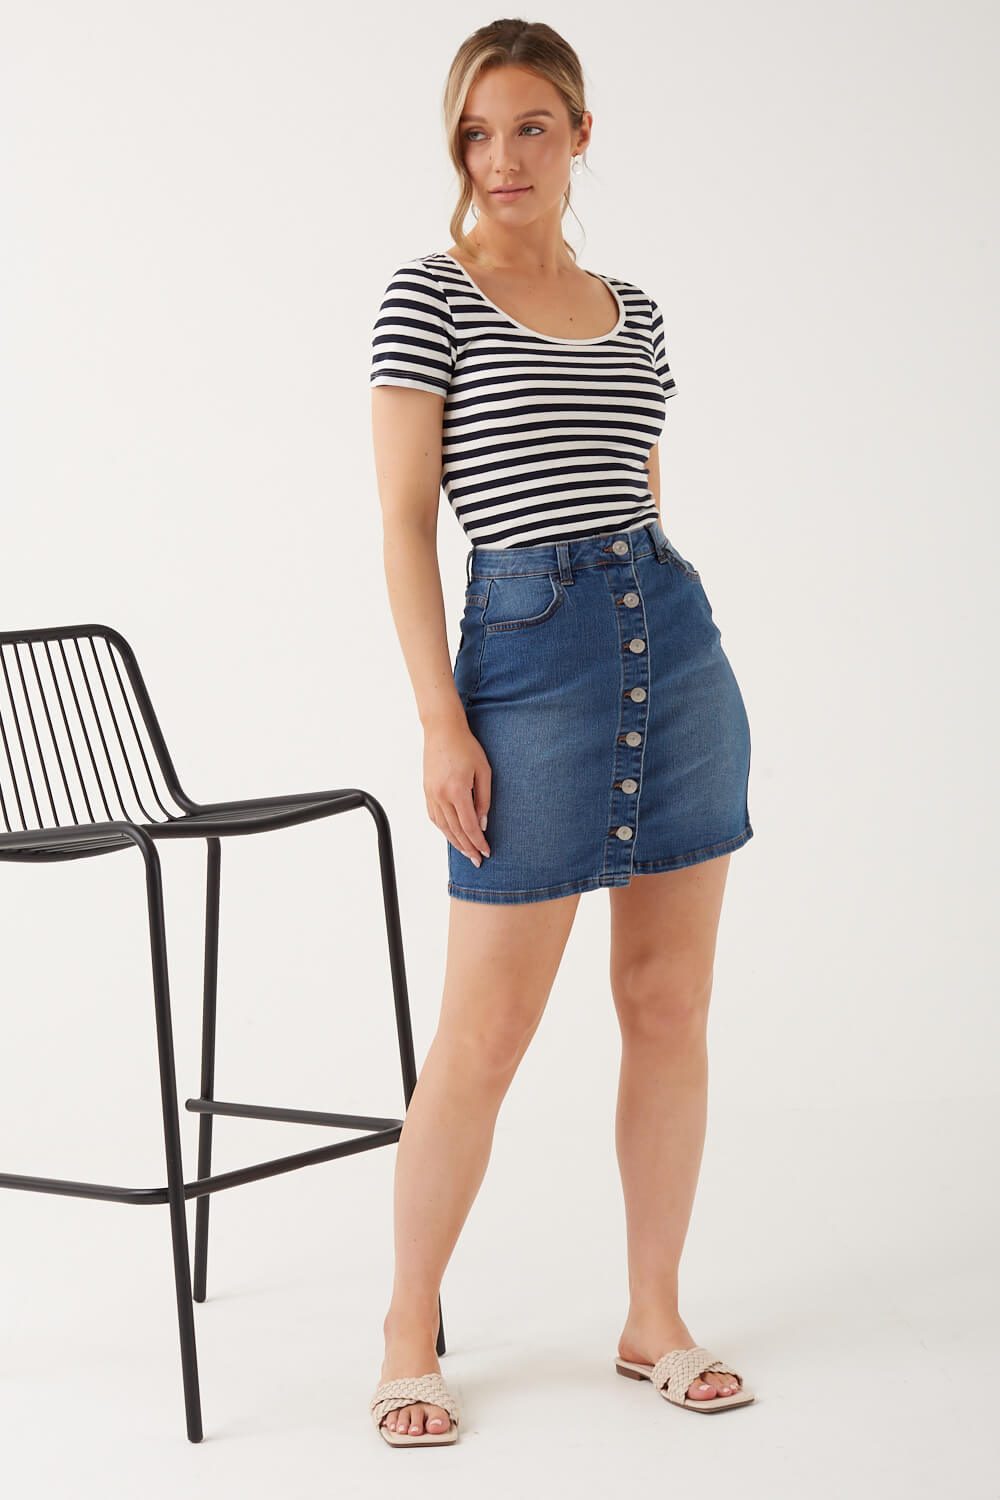 Pieces Peggy High Waisted Button Down Skirt in Mid Wash Denim